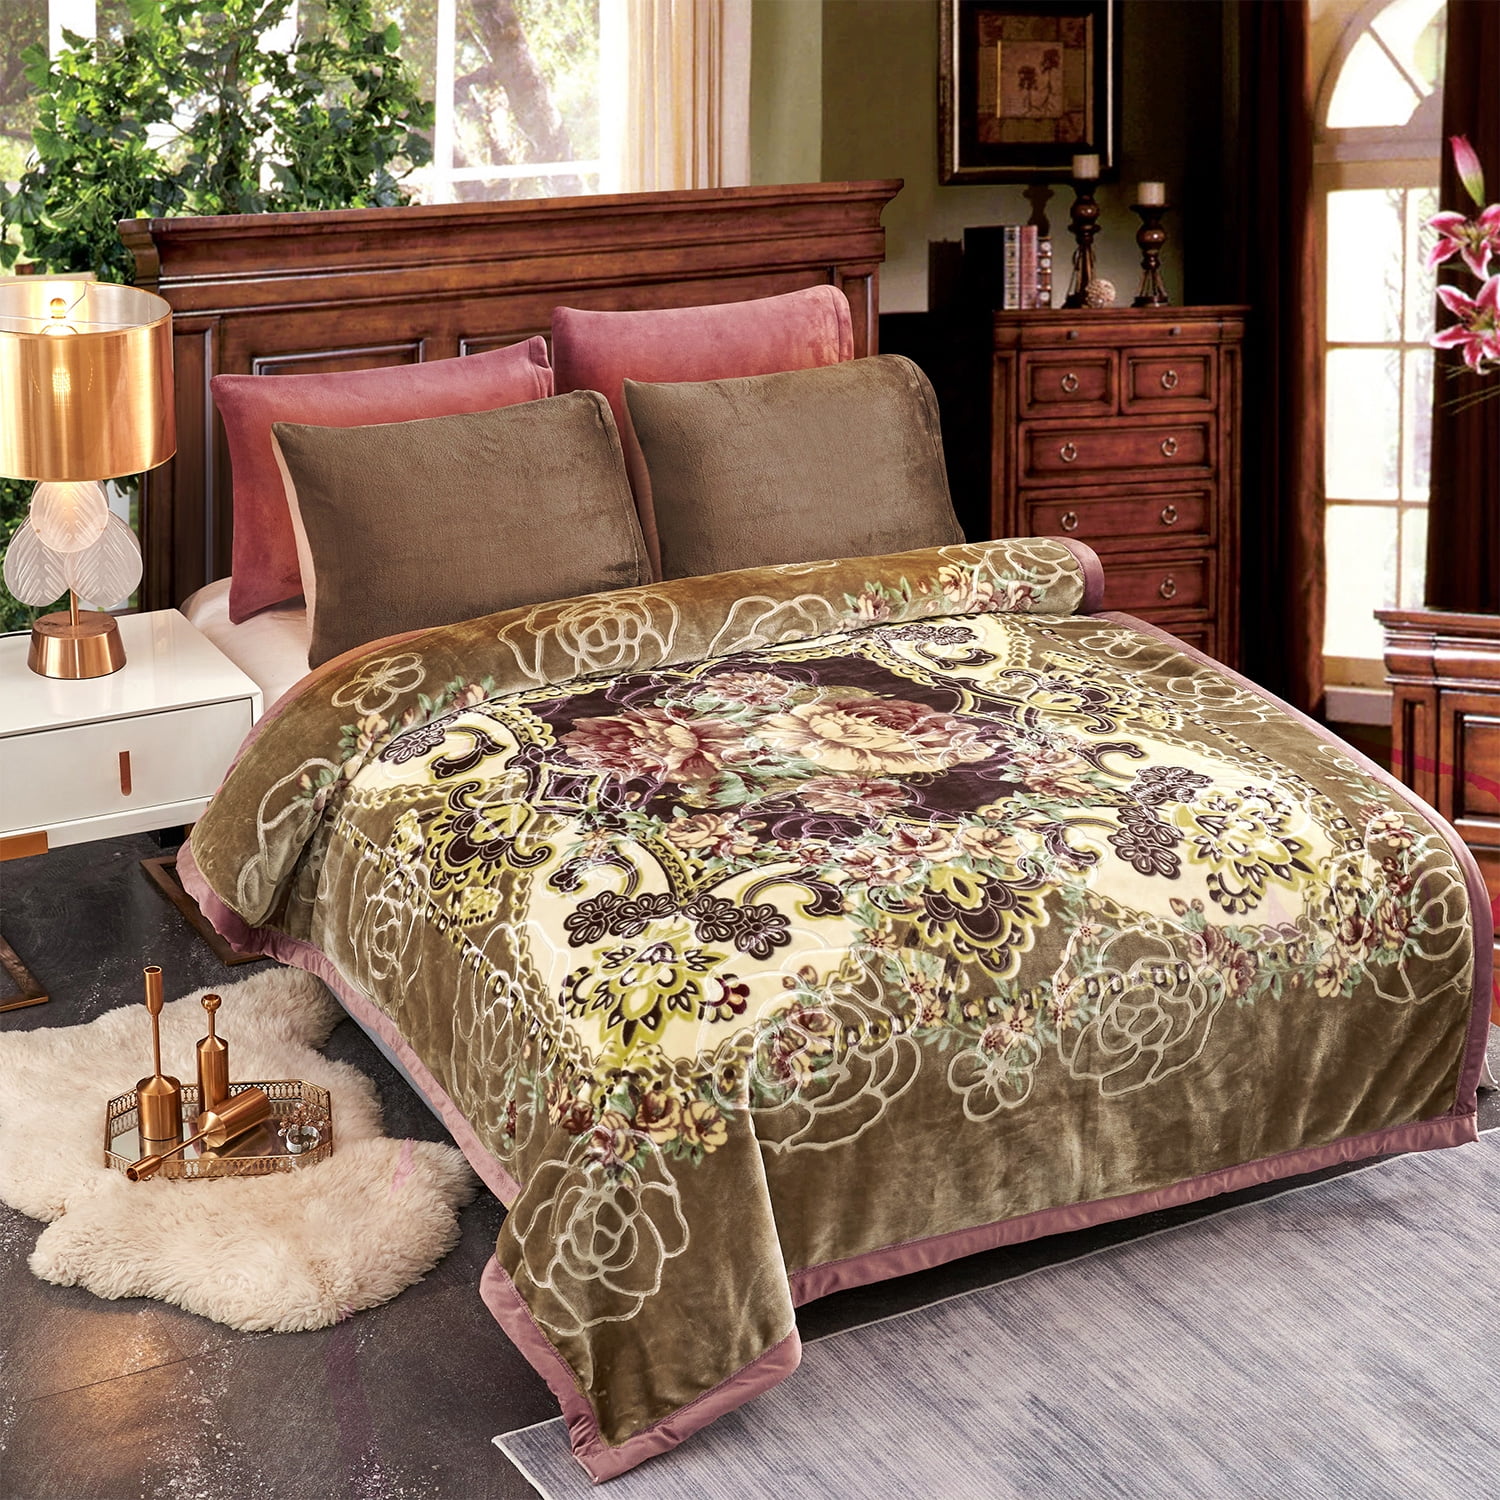 NC Fleece Bed Blanket Queen ,2 Ply Soft Warm Plush Blanket,Brown Floral,79  x 89,5.3lb 